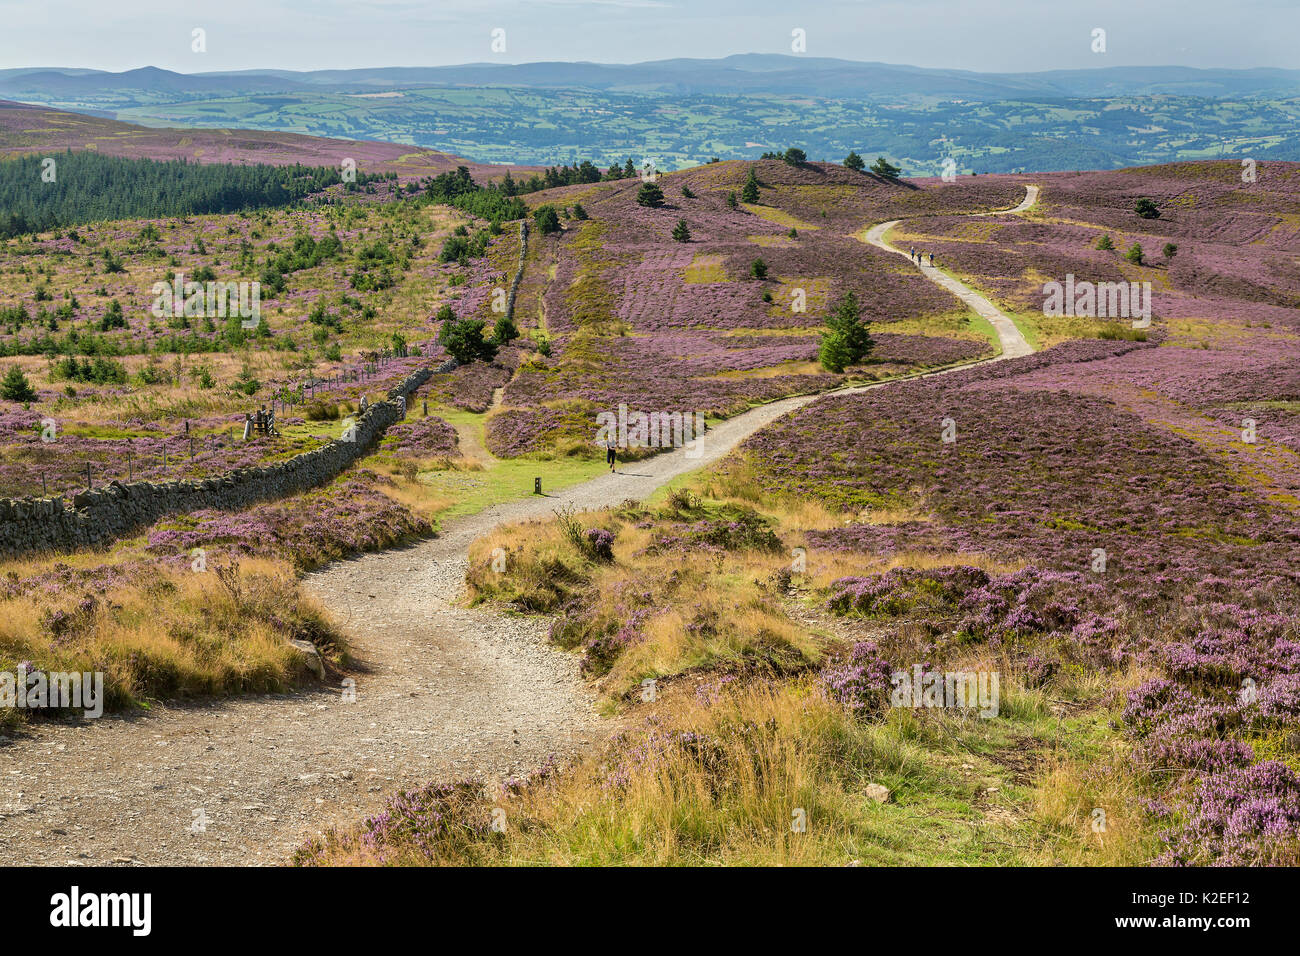 Offa's Dyke path viewed from the summit of Moel Famau in the Clwydian Mountain Range with the Vale of Clwyd in the distance, North Wales, UK, August. Stock Photo